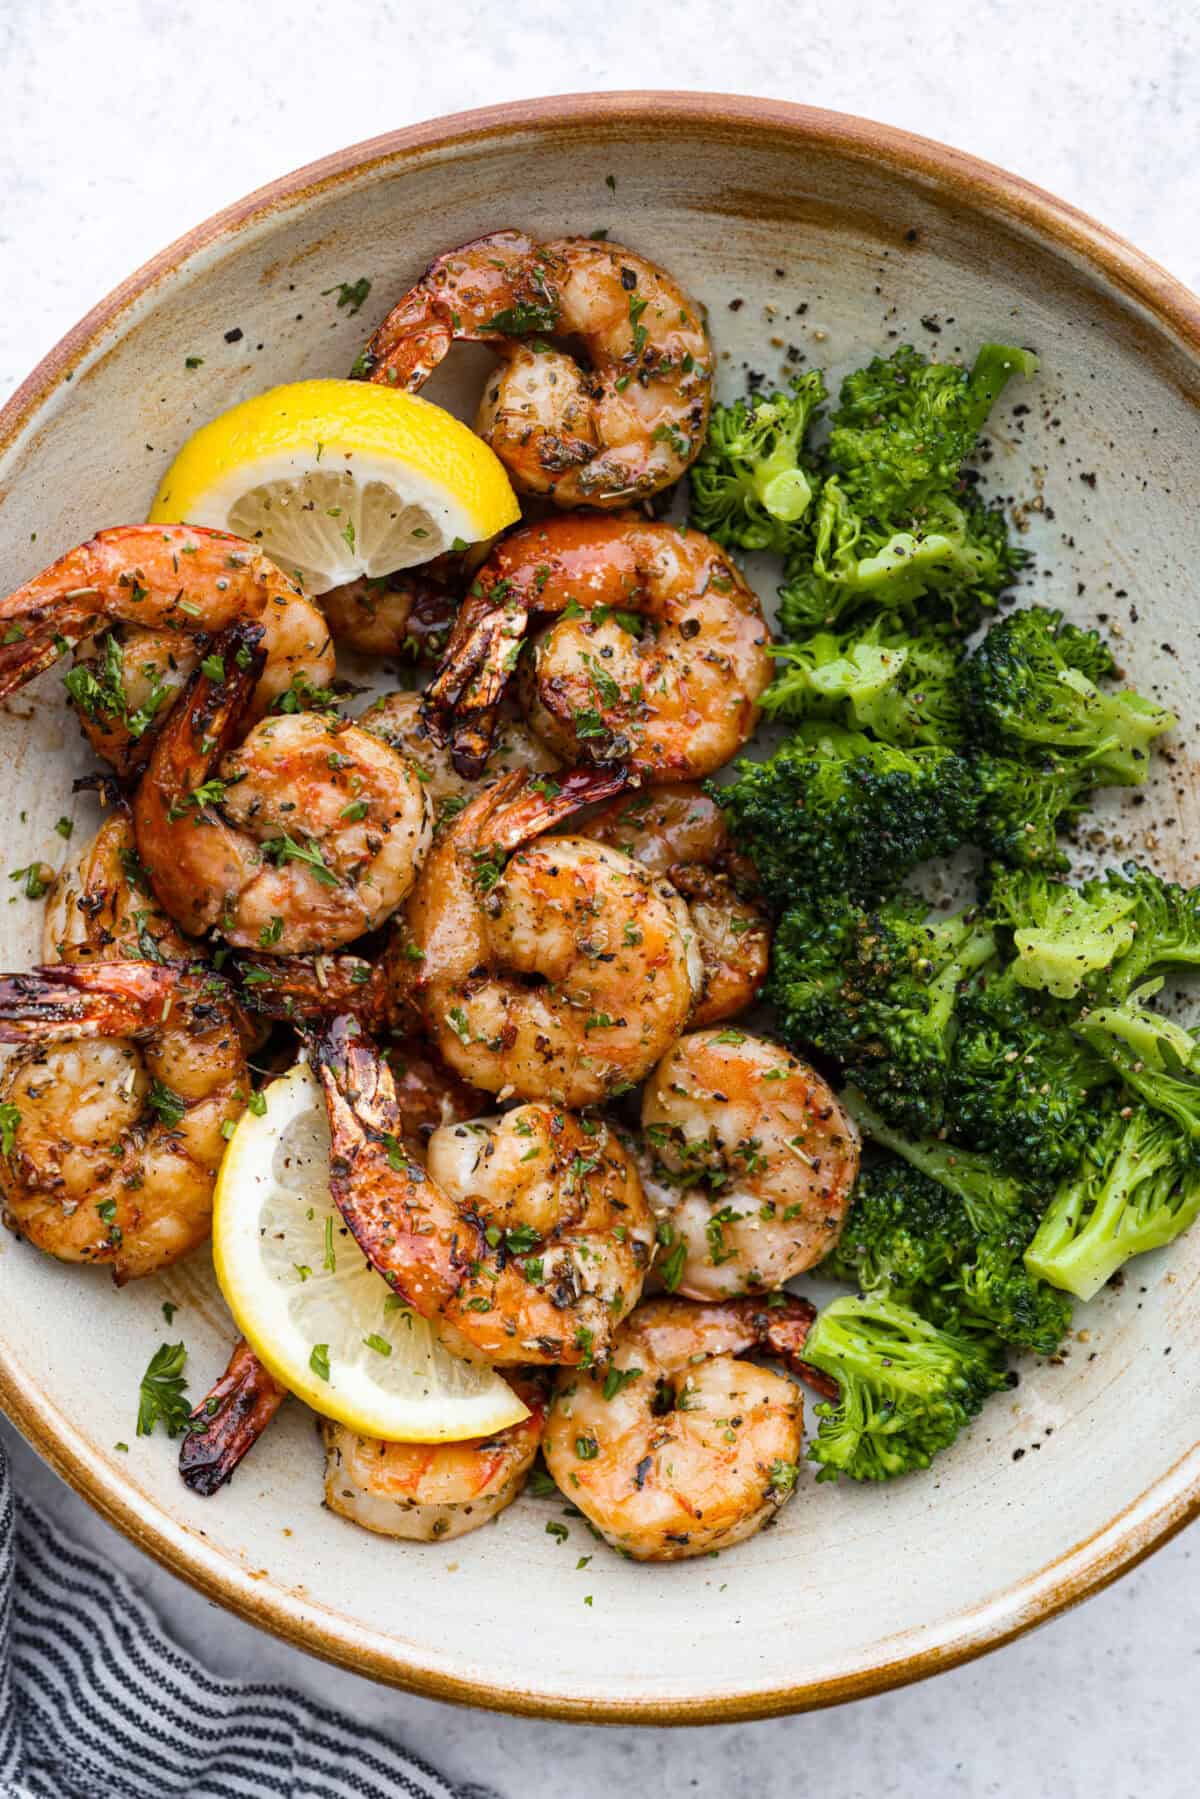 Top view of air fryer shrimp in a bowl with broccoli and garnished with lemon.